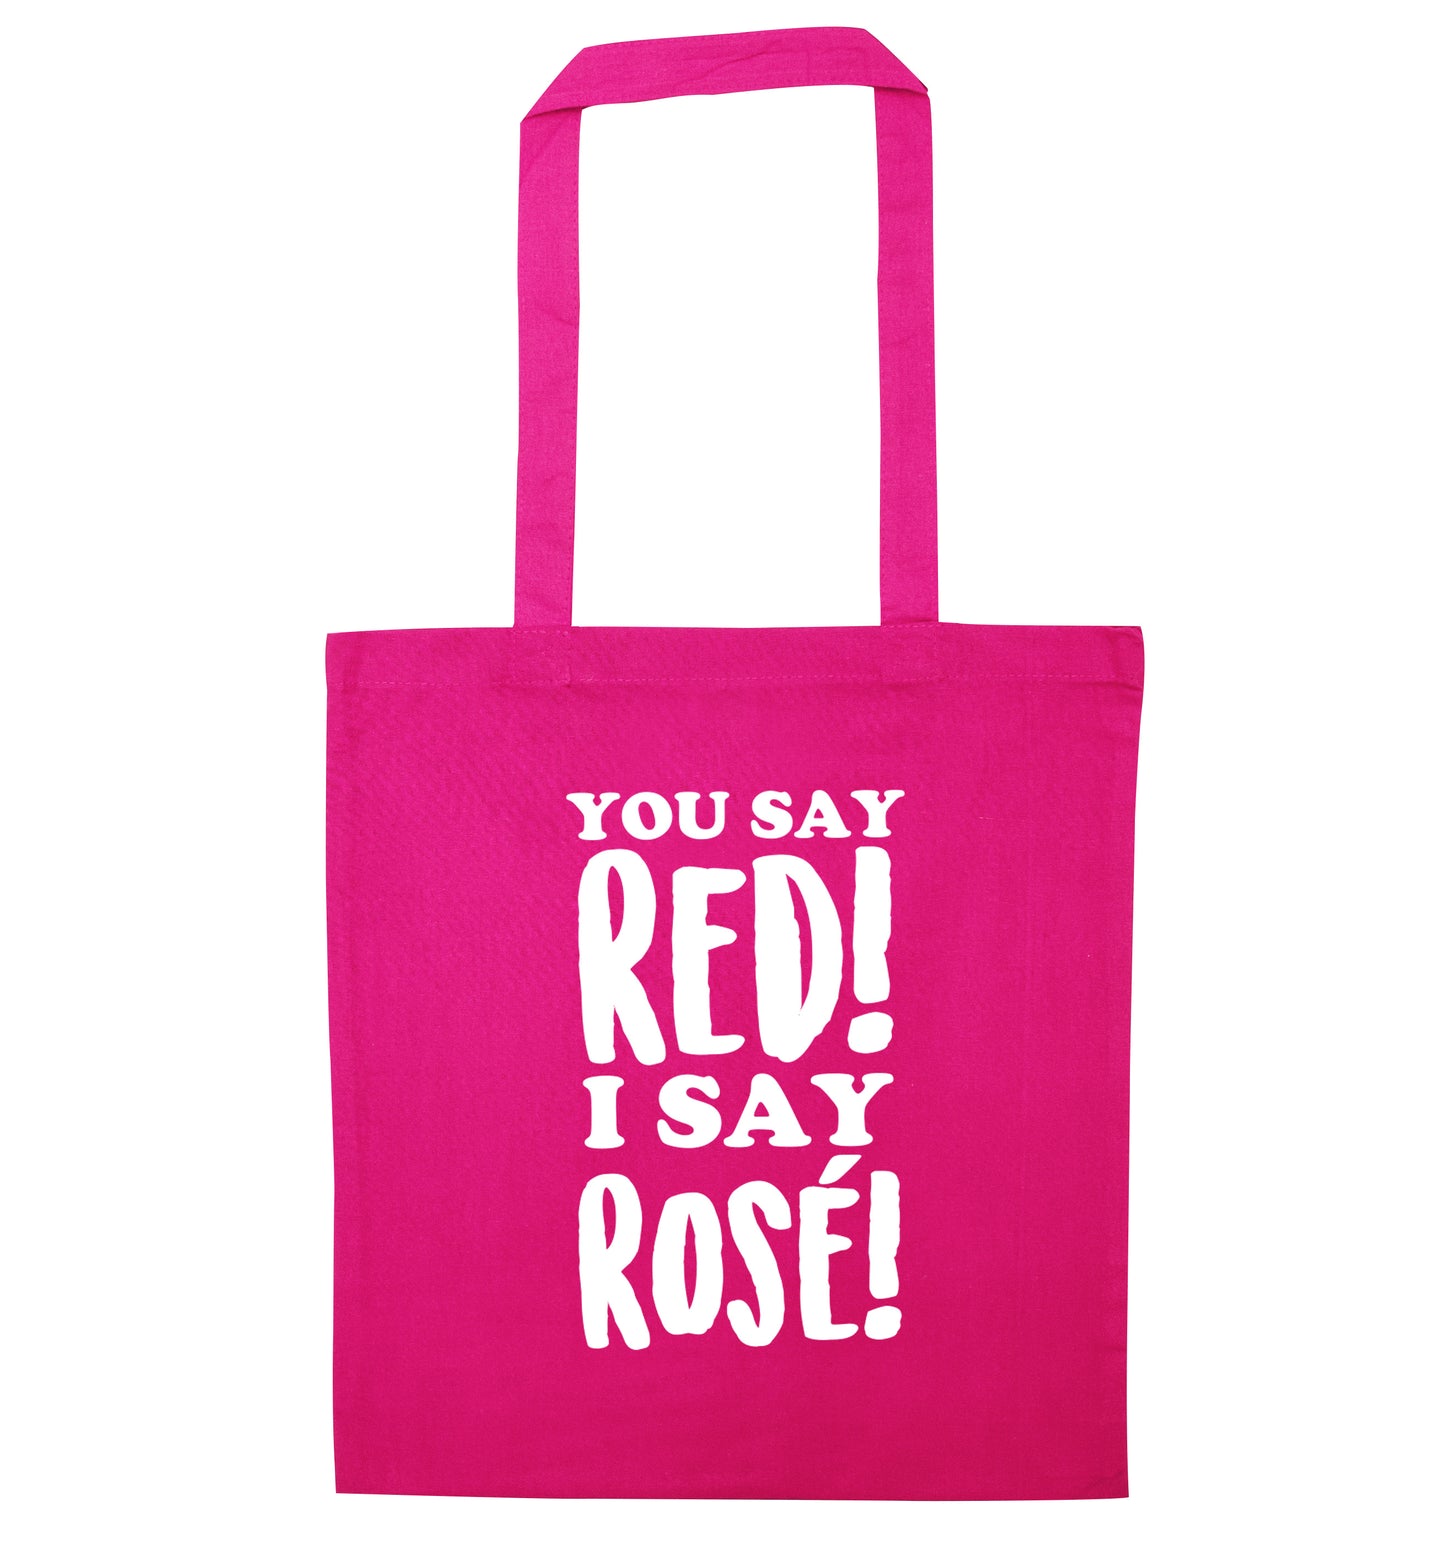 You say red I say rosÃ© pink tote bag